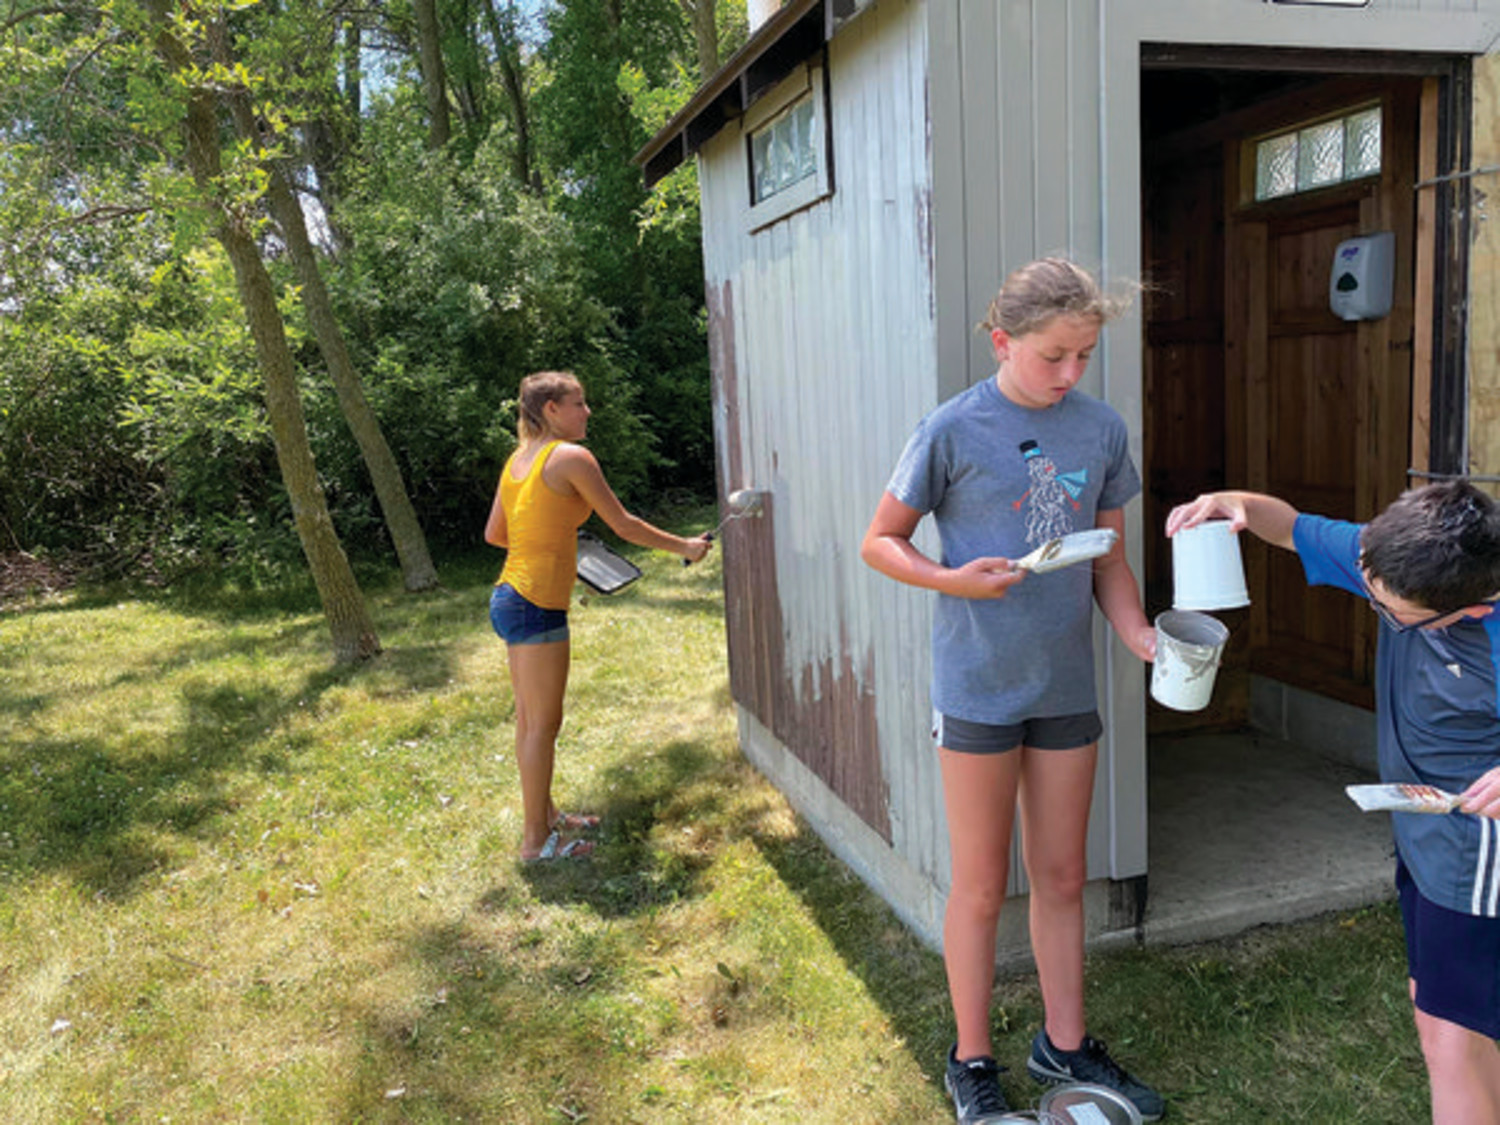 PAINTING THE OUTHOUSE (pictured, from the left) Hannah Sanders, Sloan Rodemeyer and Cael Rodemeyer at Duhigg Park.